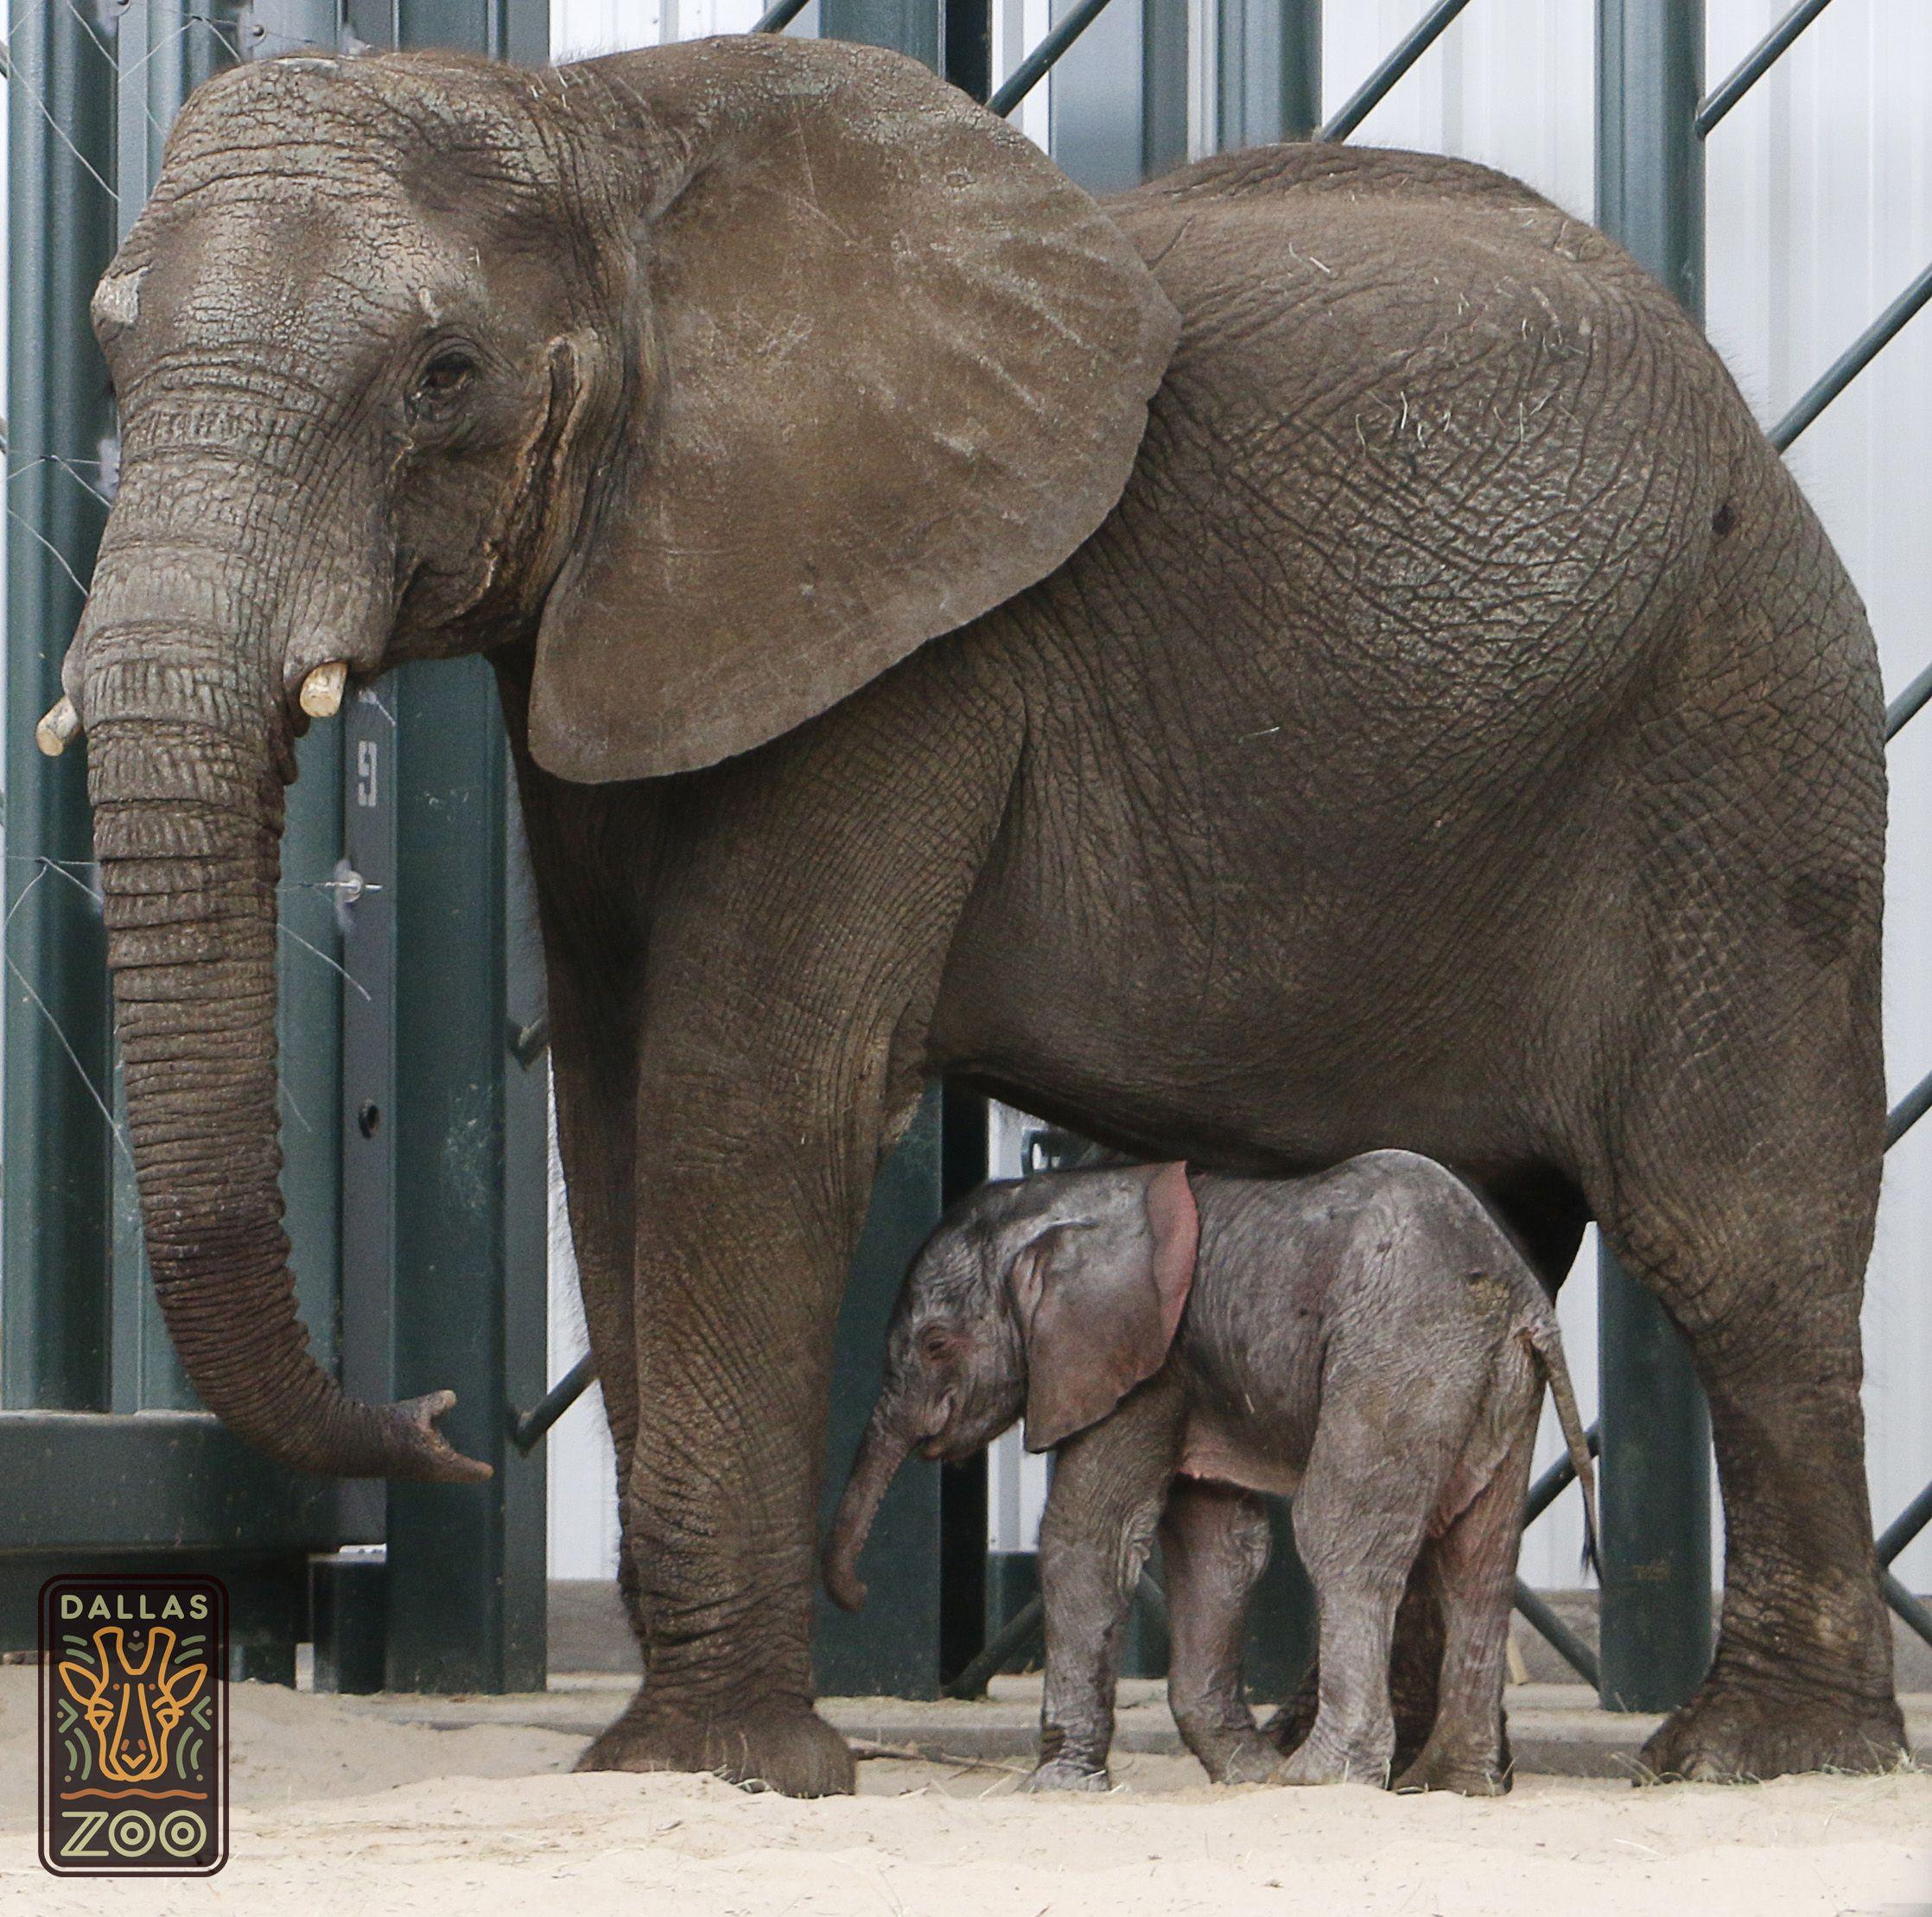 Baby Elephants Logo - Oh, baby! Dallas Zoo herd grows after rescued Swaziland elephant